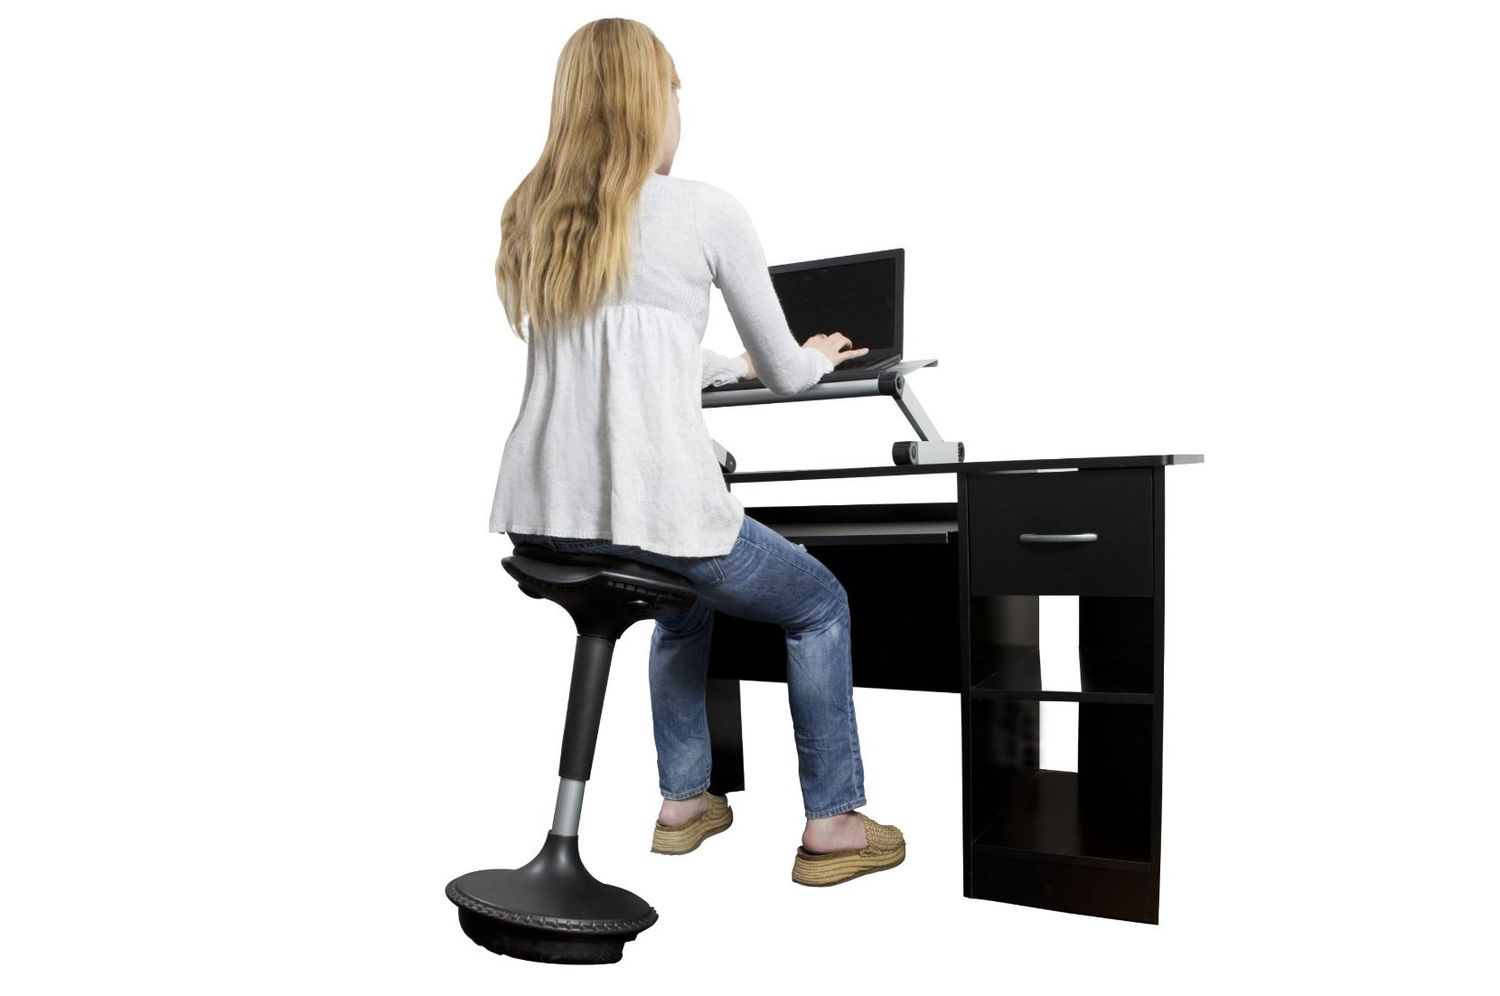 Woman sitting on a wobble stool using a laptop